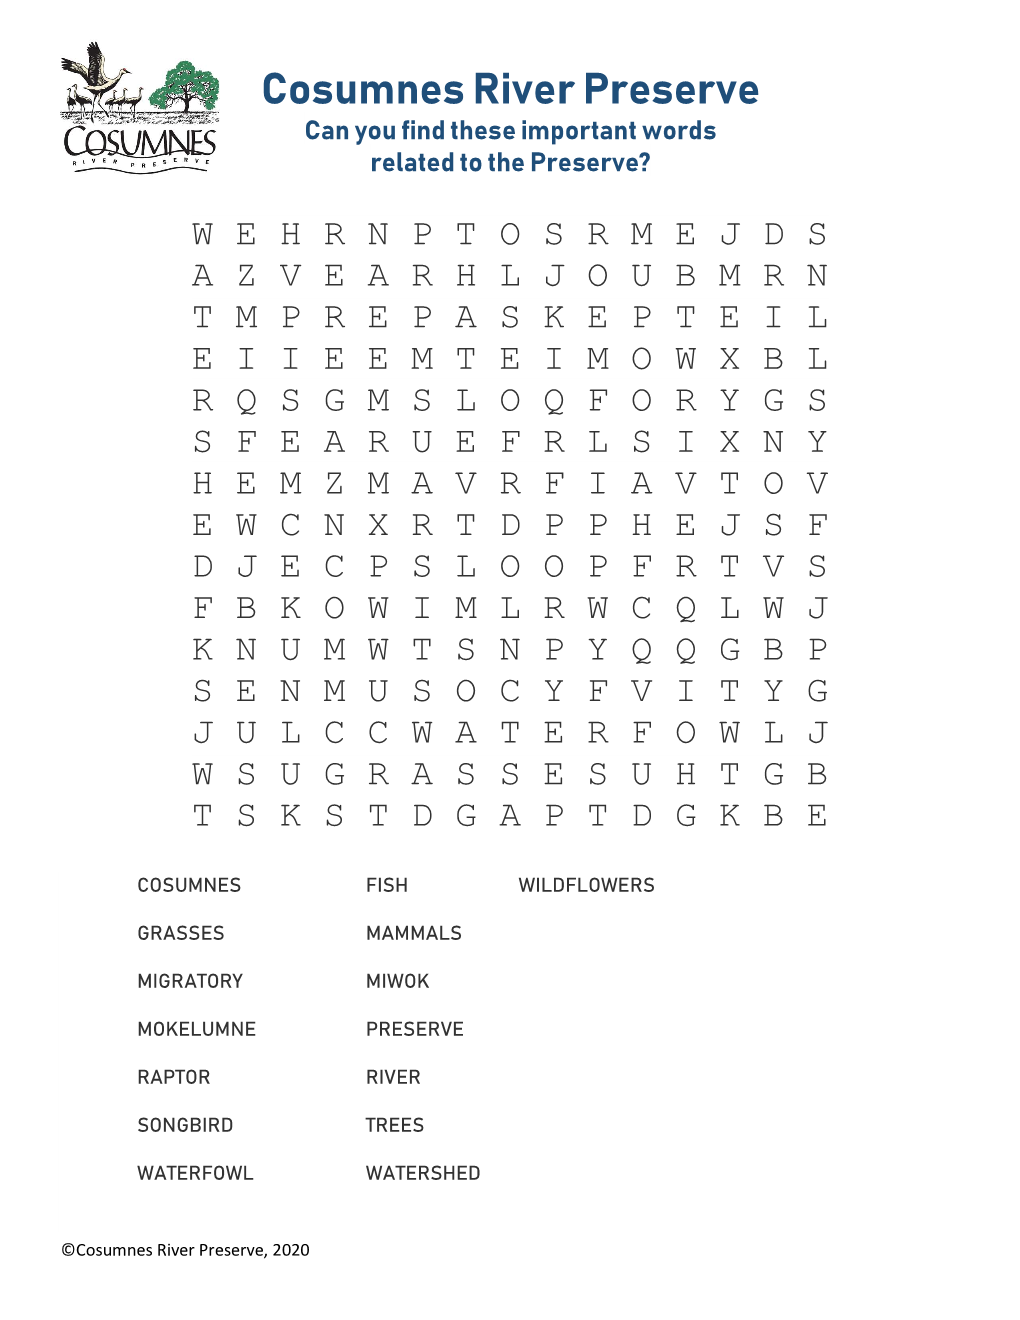 Word Search and Fact Sheet